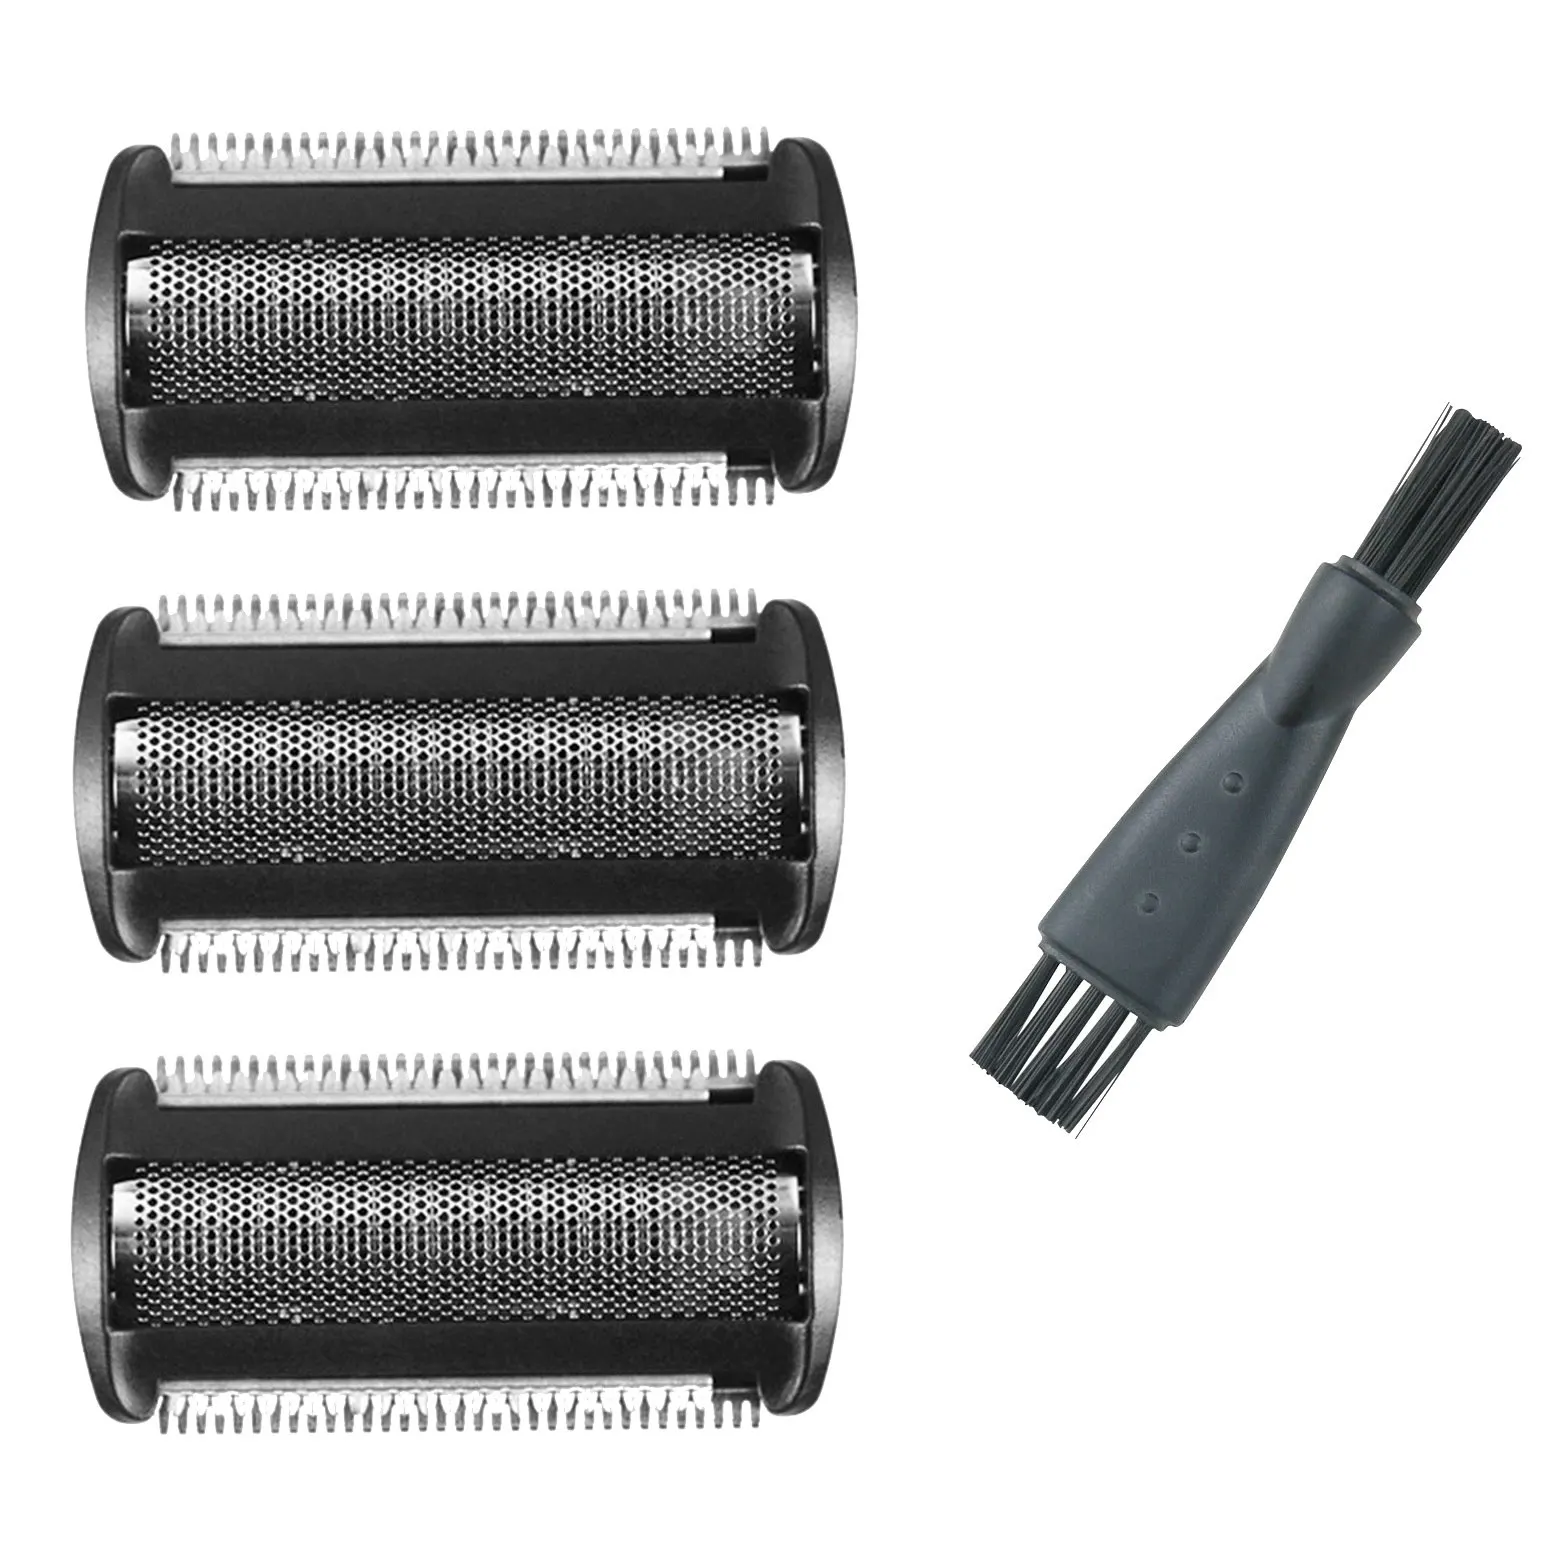 

3 Pack Shaver Head Replacement Trimmer for Philips Bodygroom BG 2024 - 2040 S11 YSS2 YSS3 Series with Brush